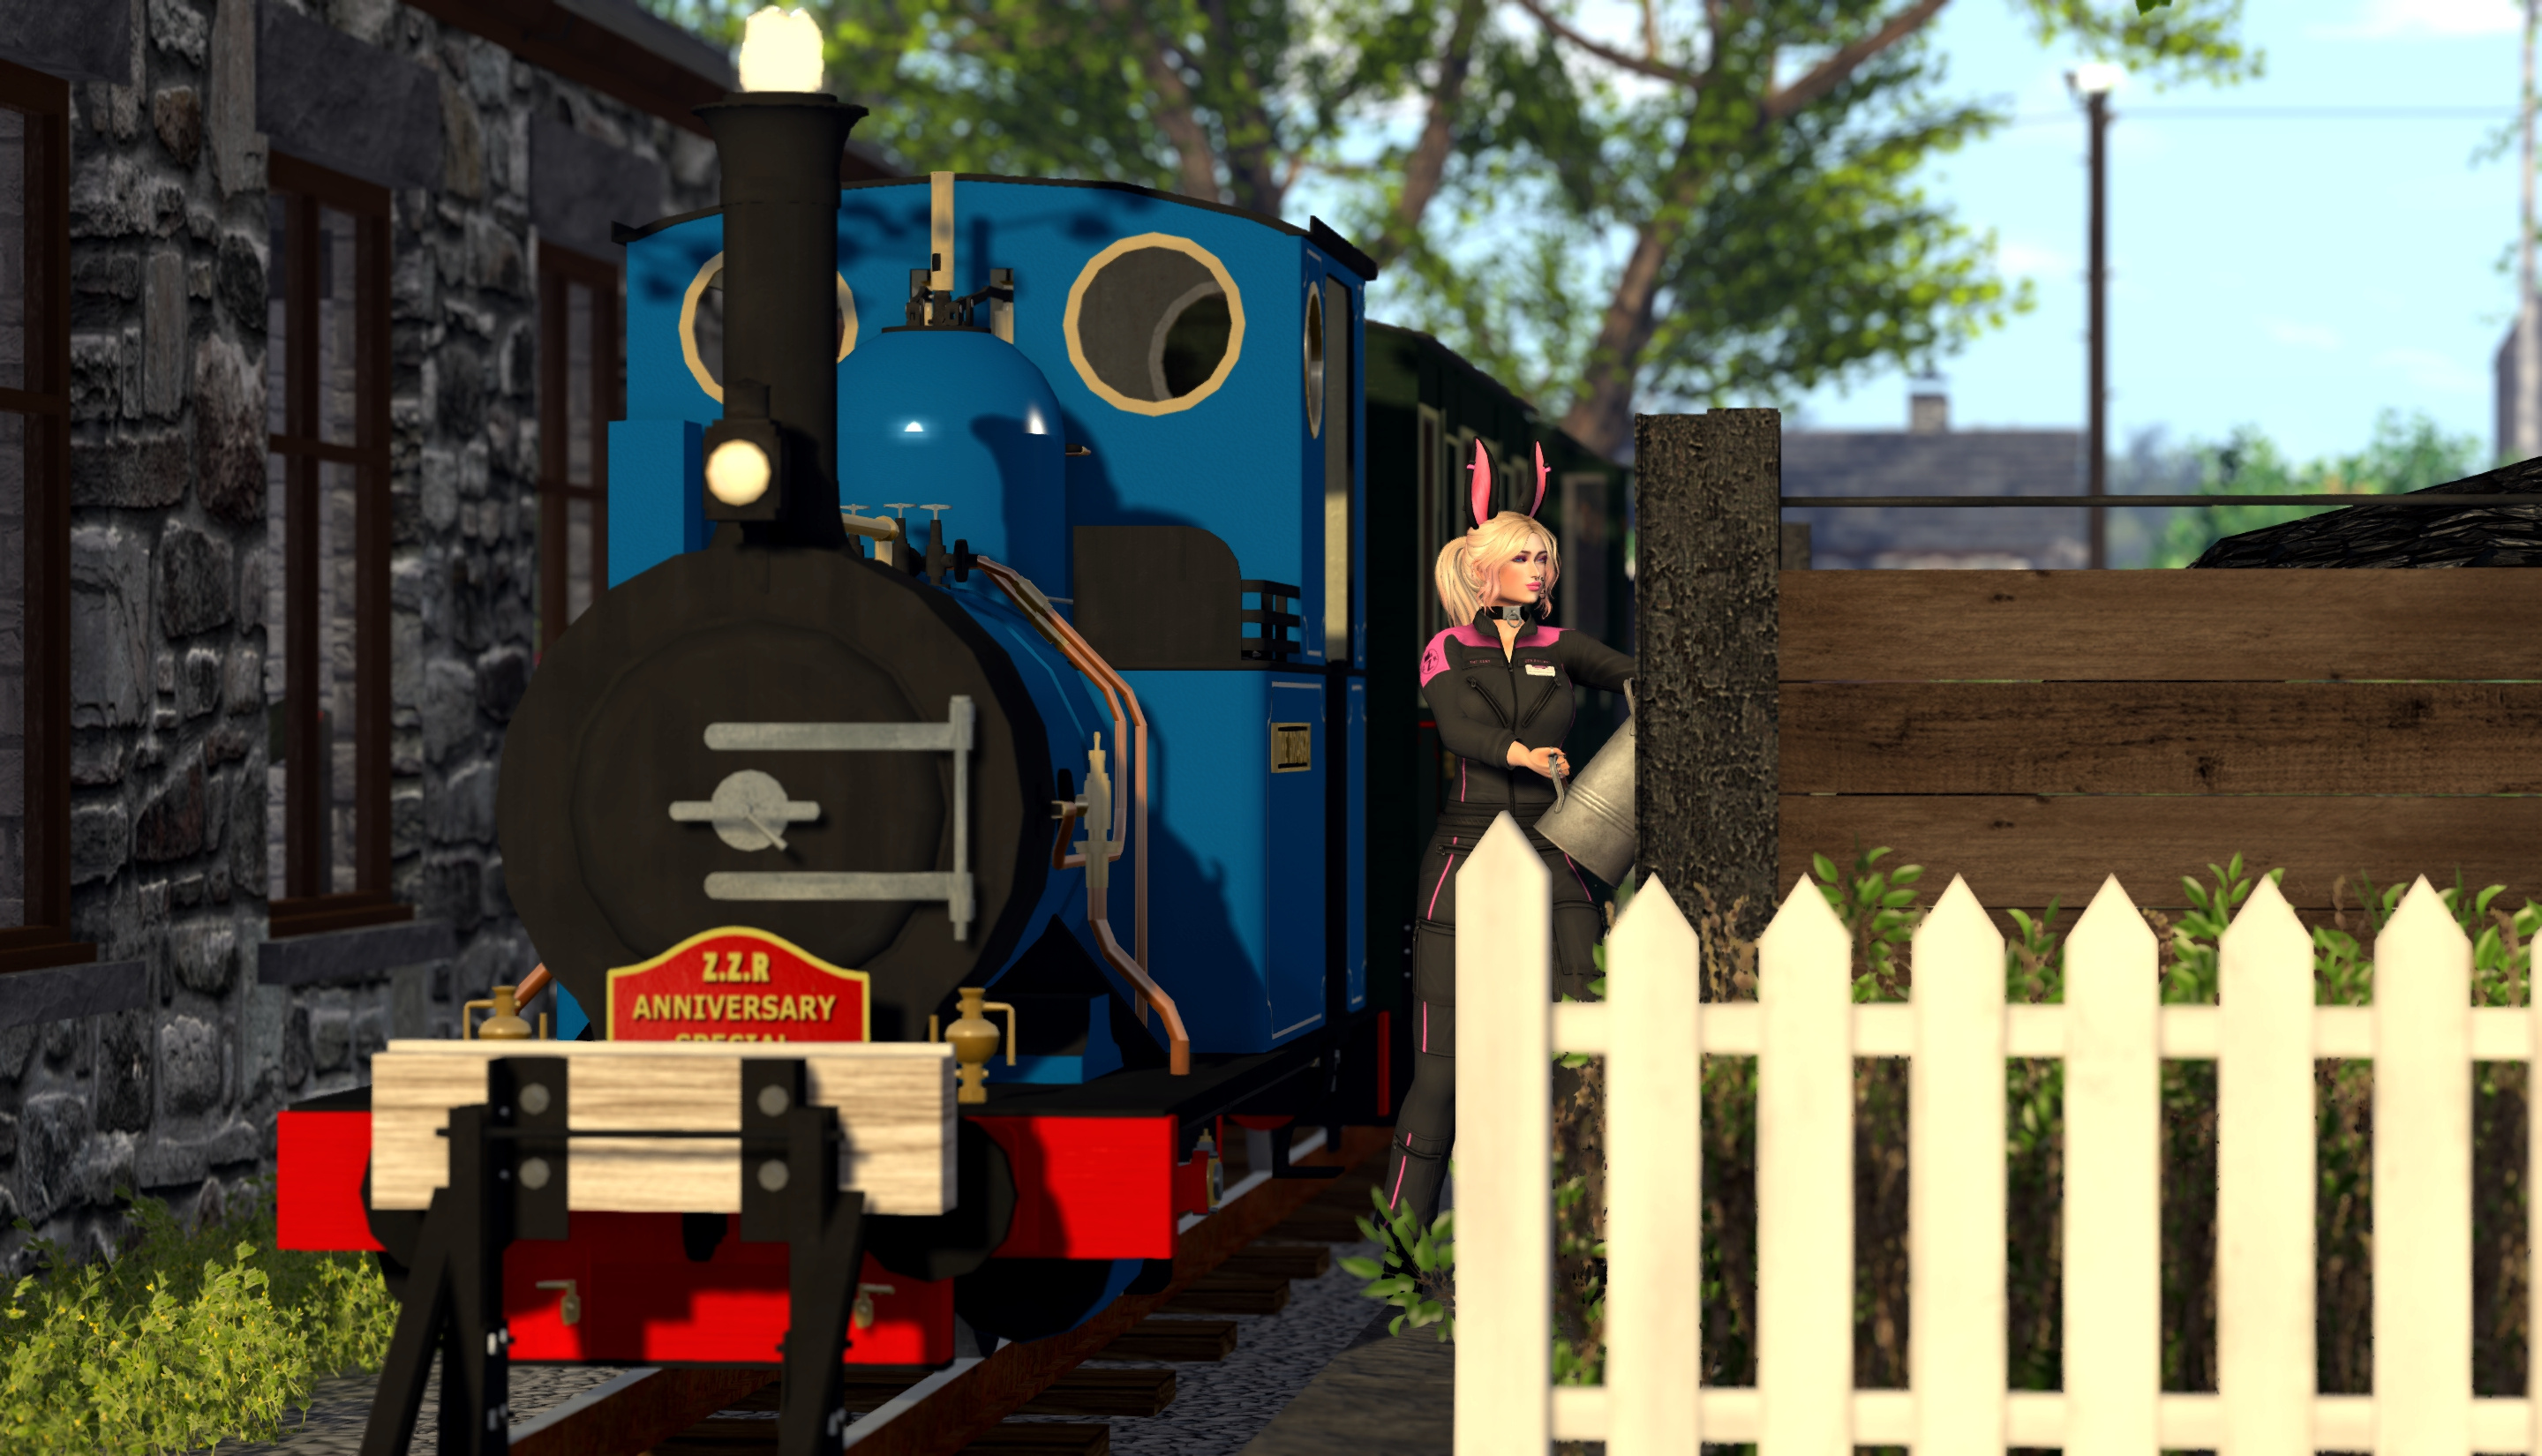 Zen coaling up the passenger locomotive The Dragon ready for the 17th of April